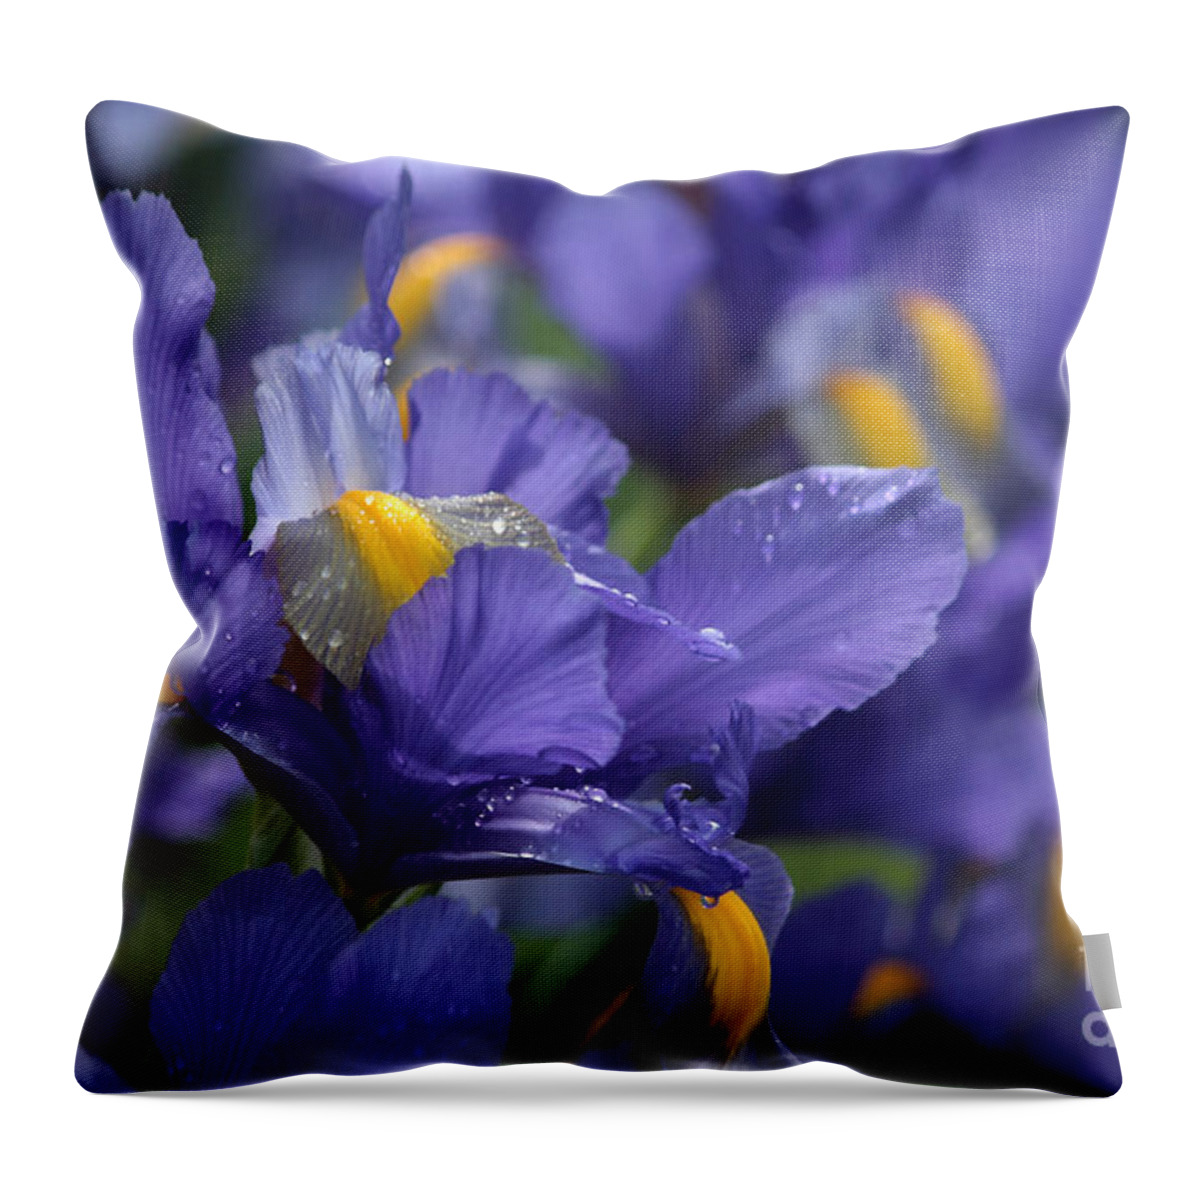 Blue Flowers Throw Pillow featuring the photograph Iris With Raindrops by Luv Photography